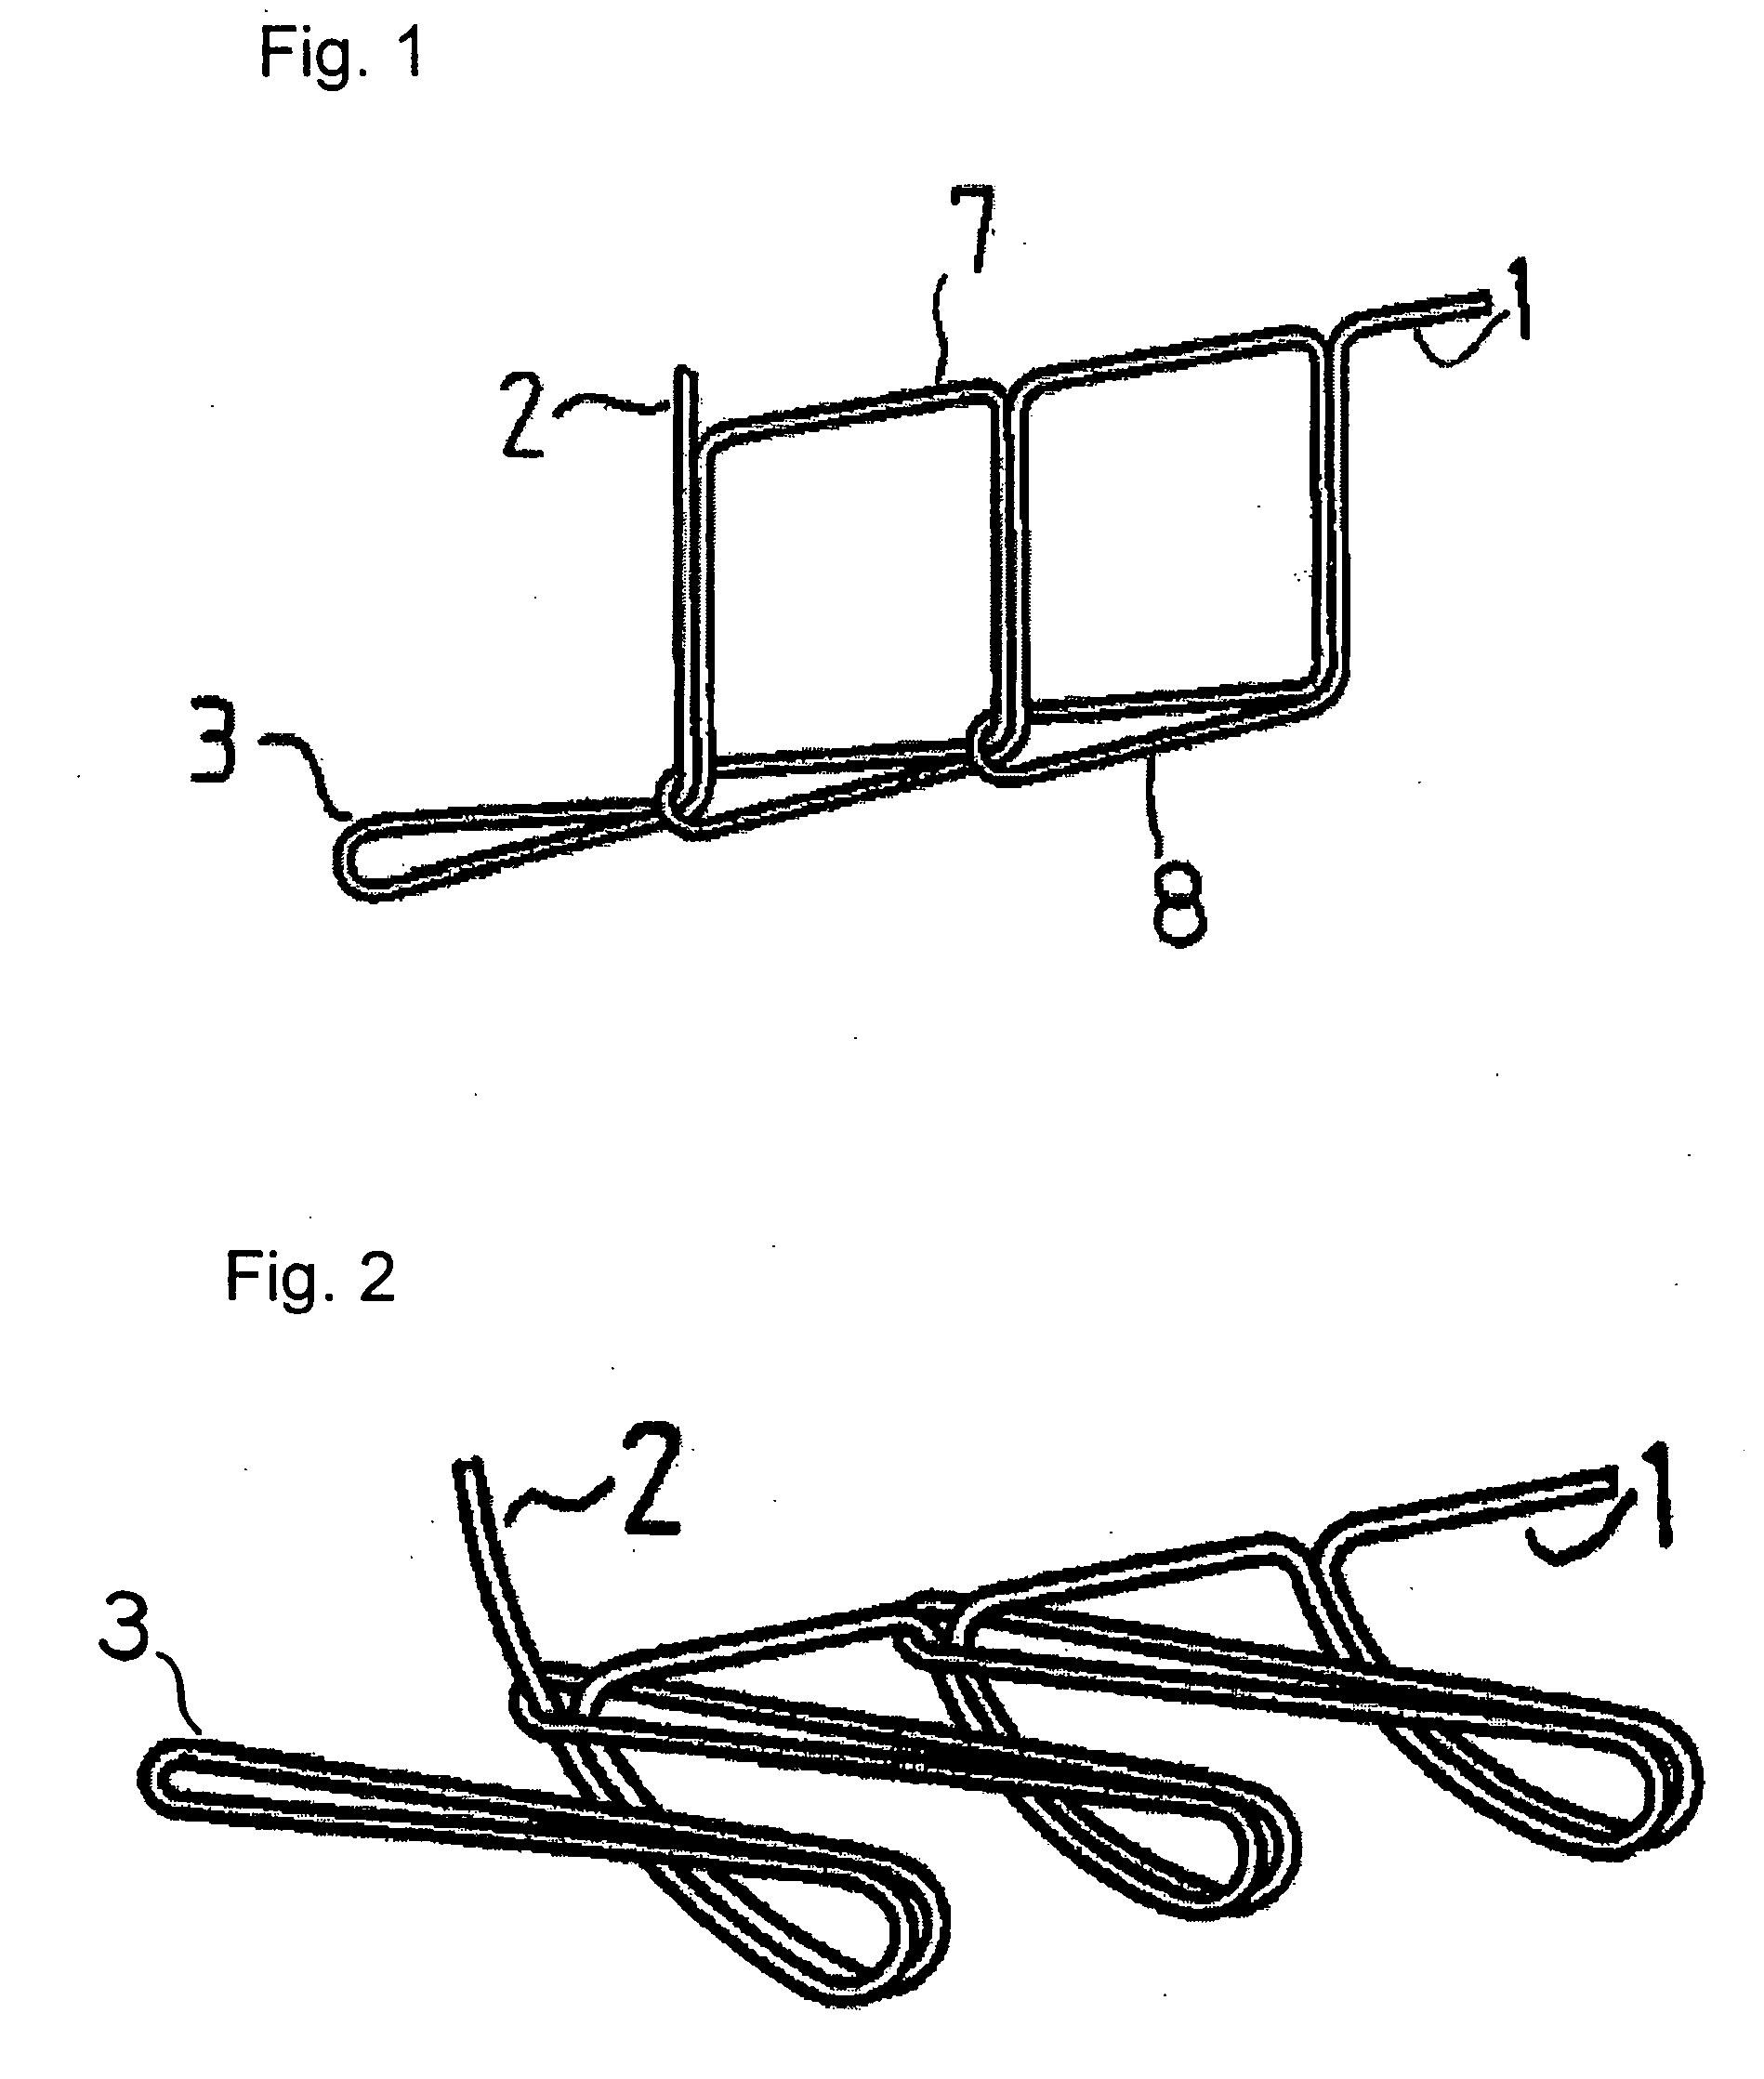 Suture prosthetic material for automatic sewing device